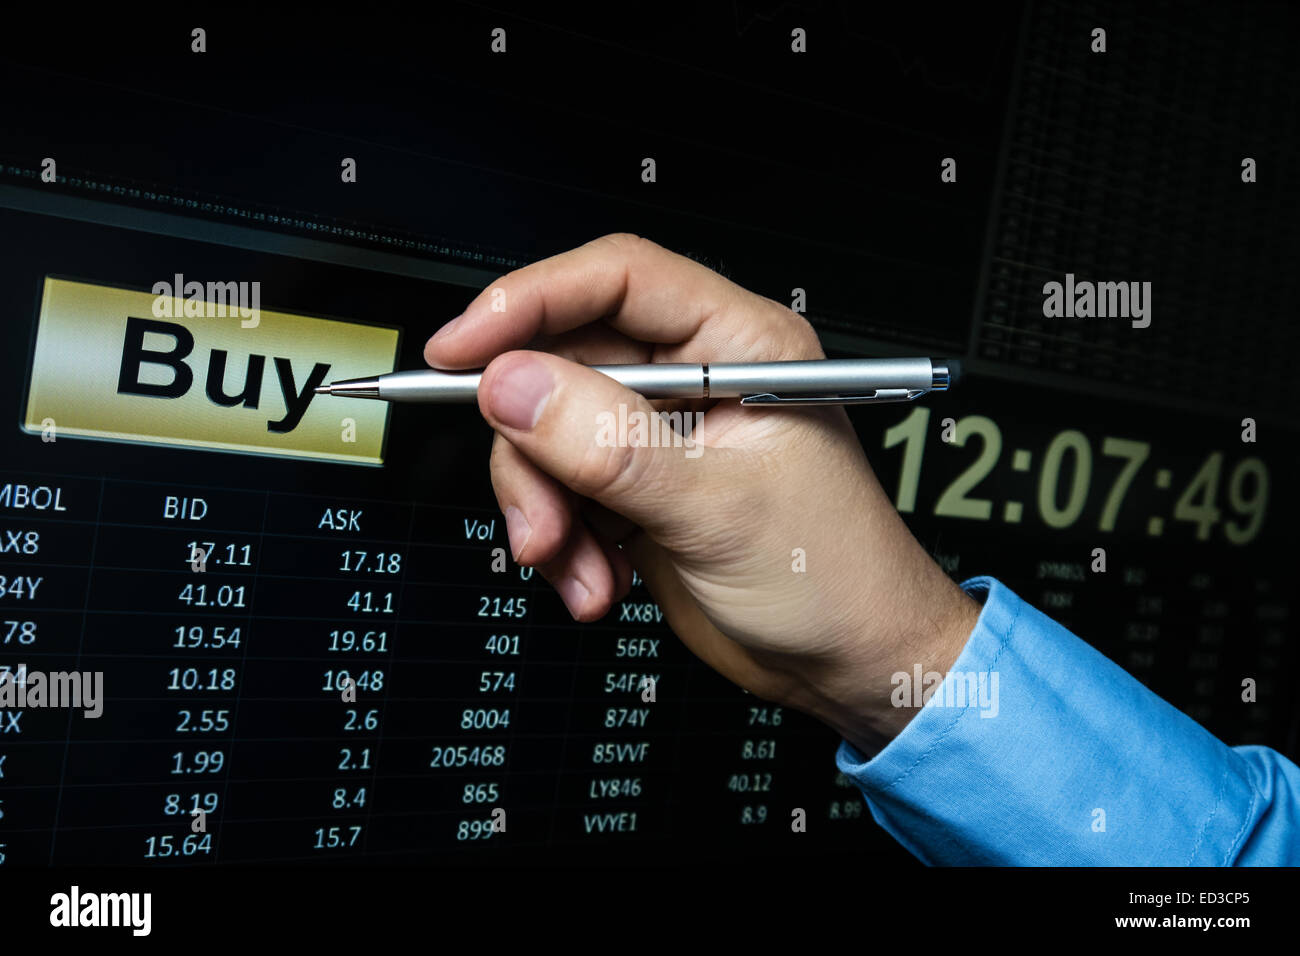 buy button and trading software, pointing with pen on button Stock Photo